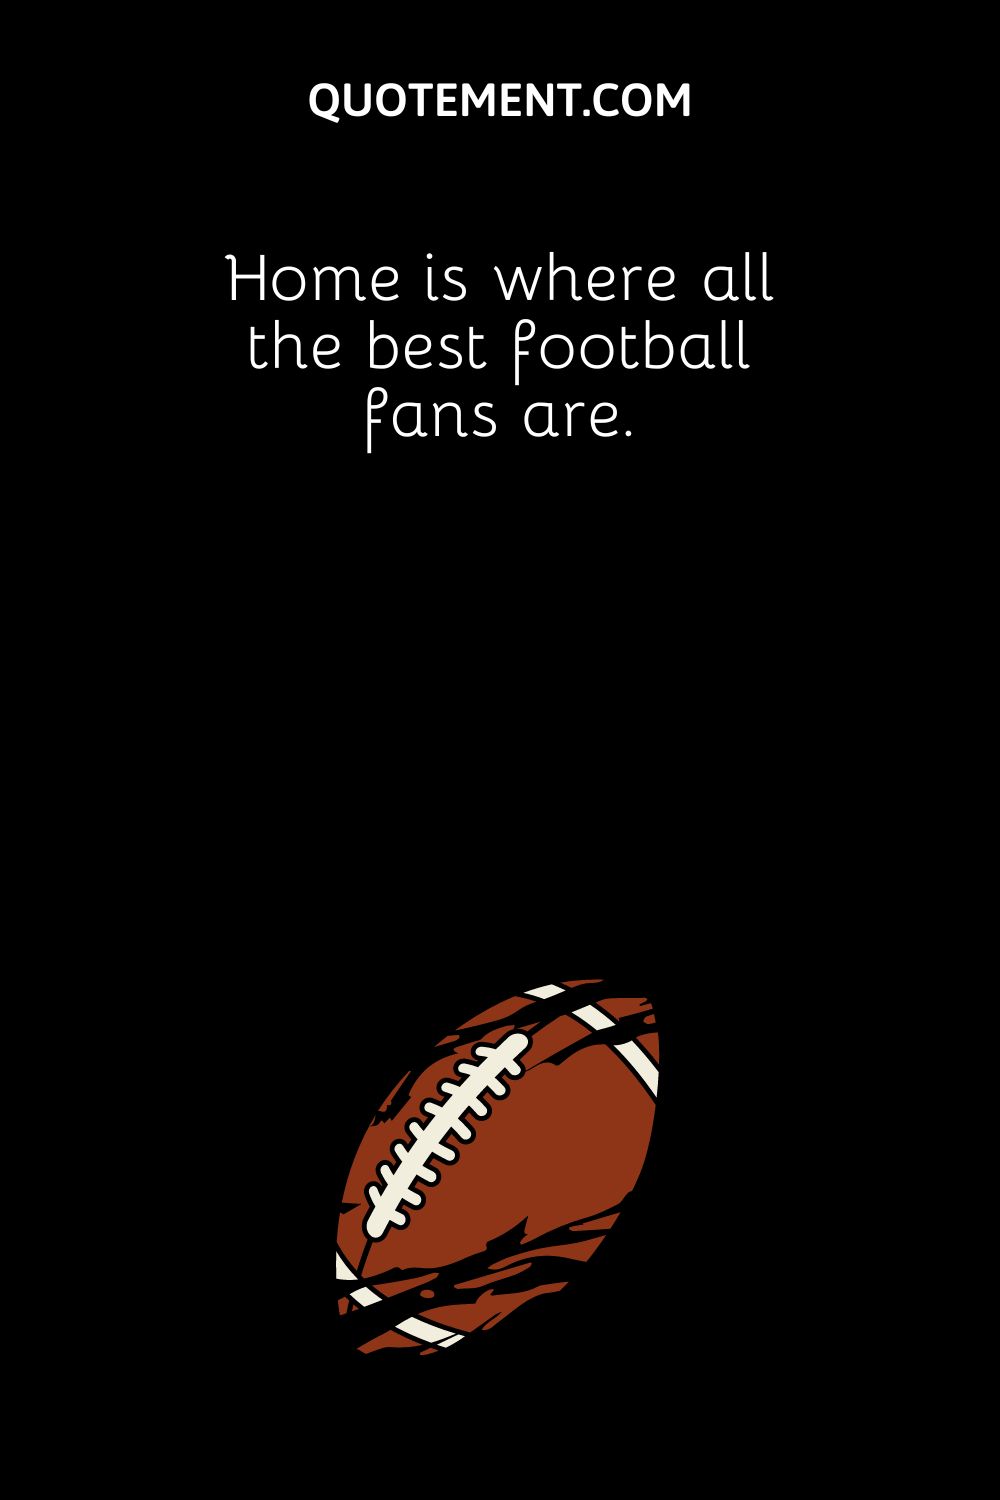 Home is where all the best football fans are